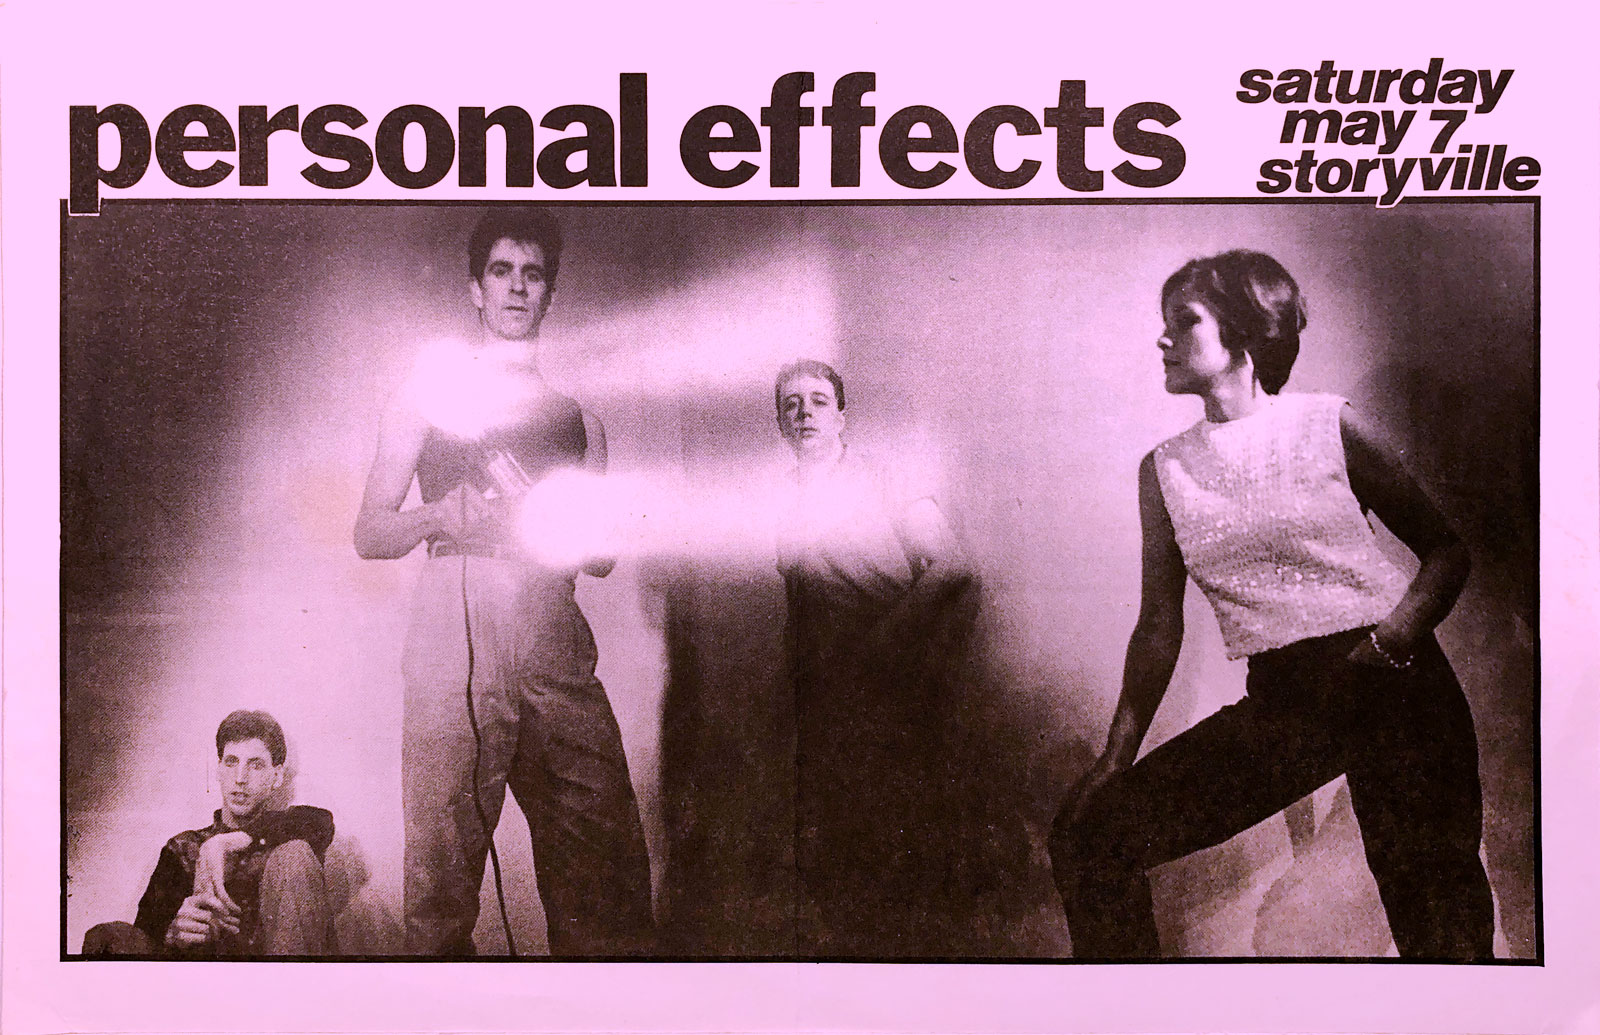 Poster for Personal Effects at Storyville in Boston, Massachusetts on 05.07.1983